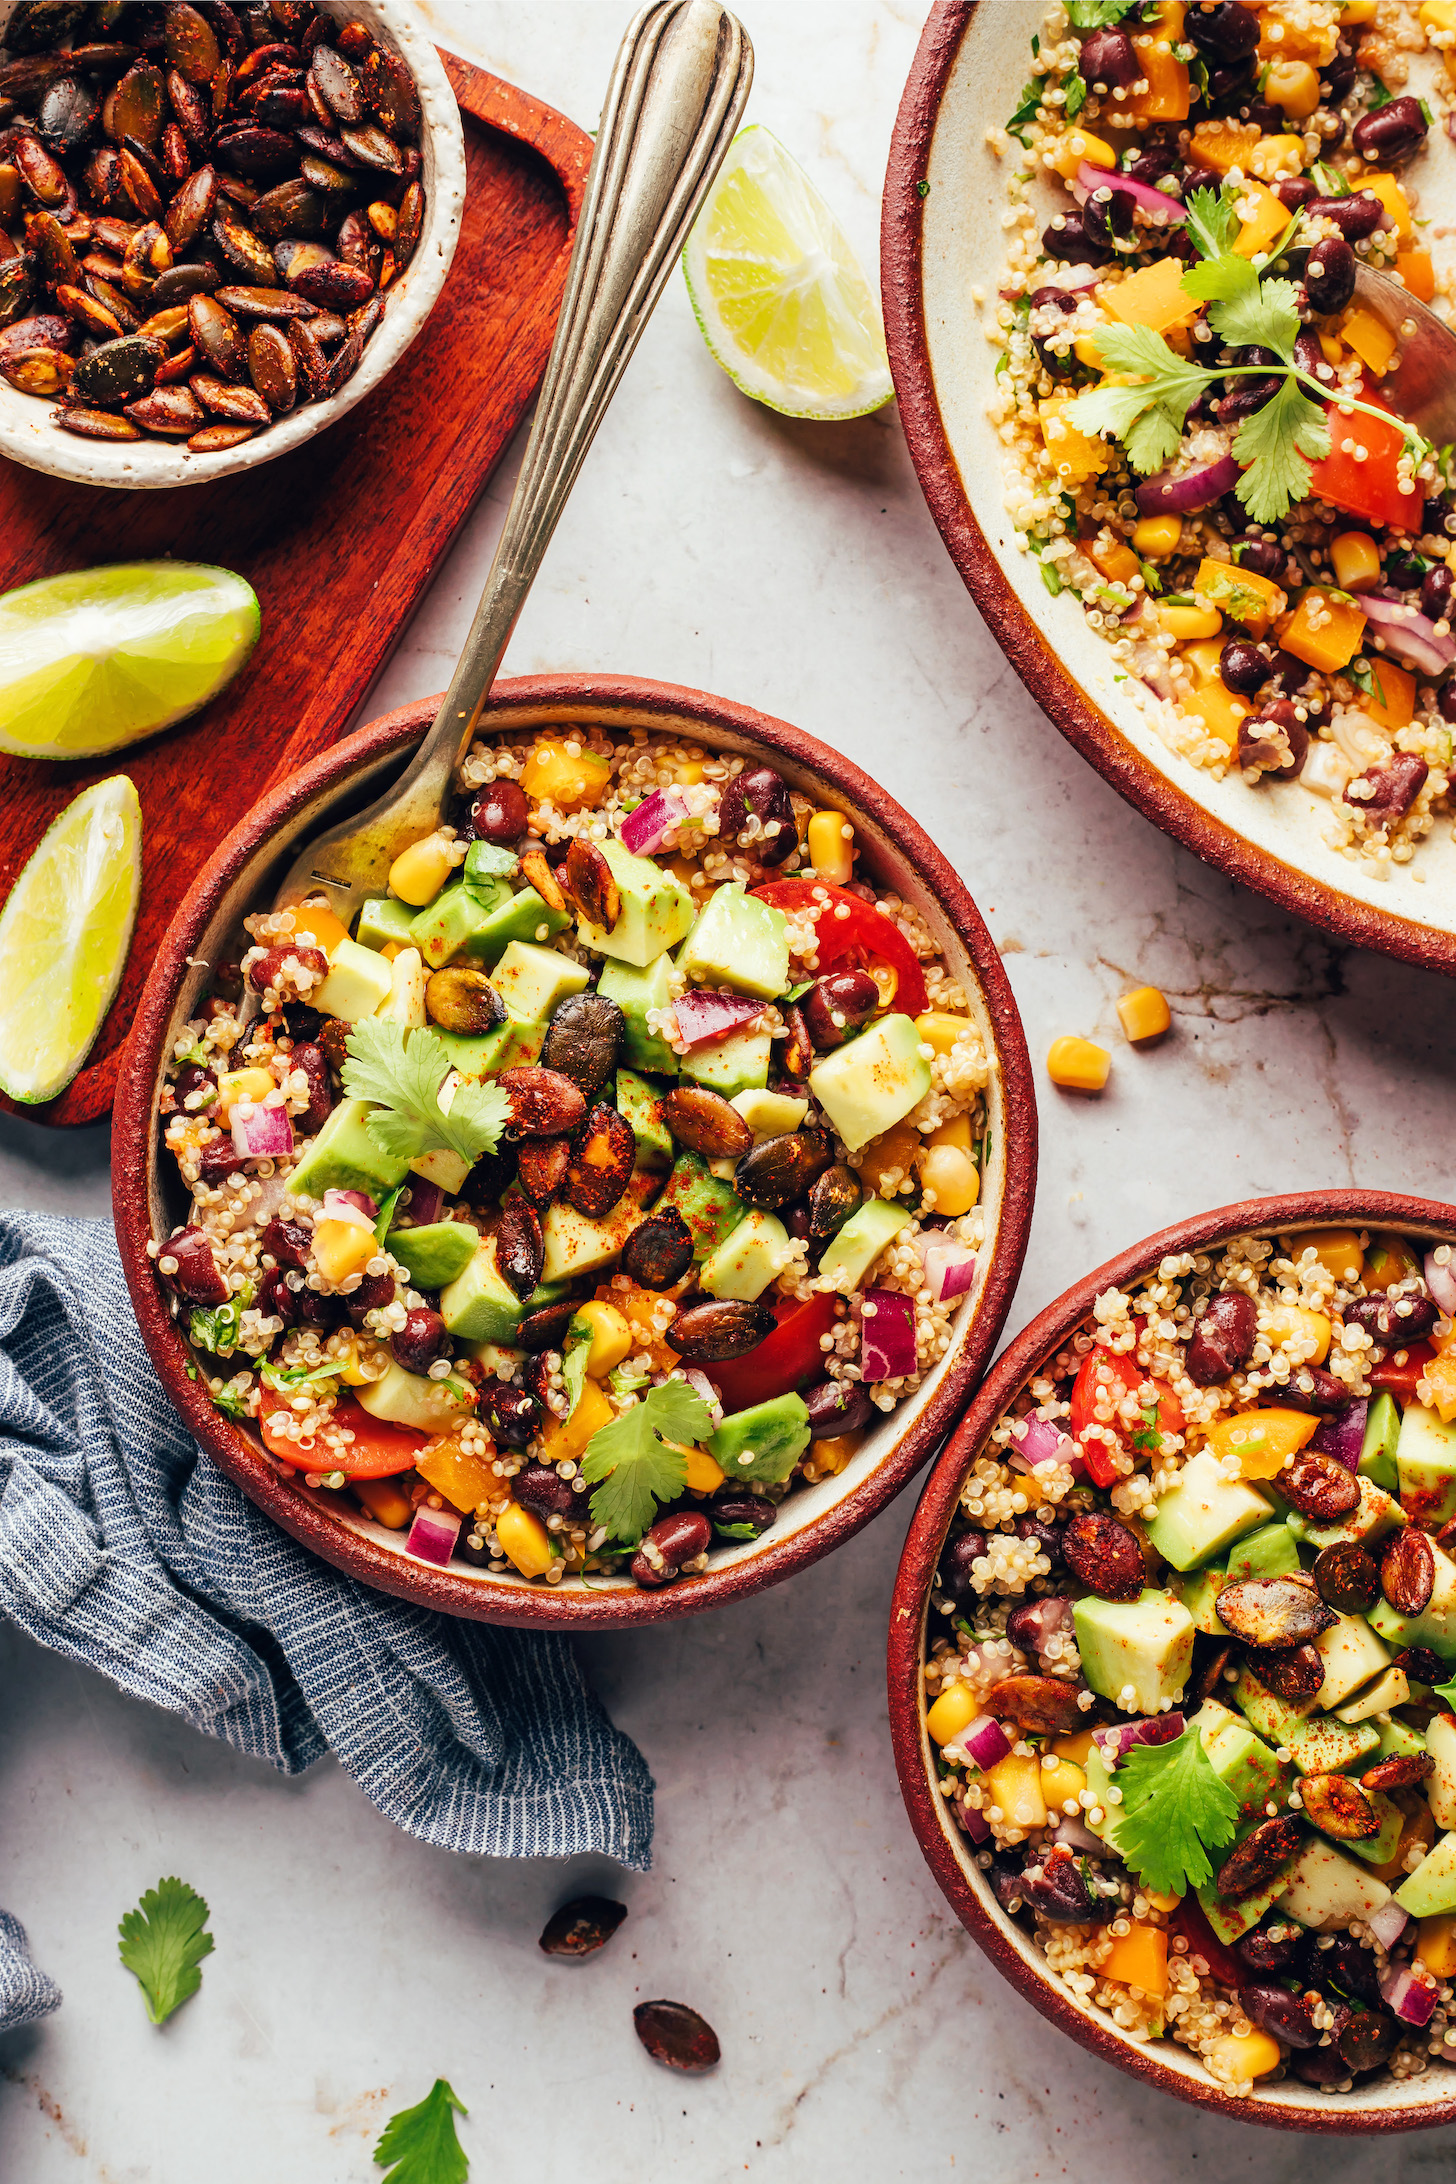 Bowls of our Southwest quinoa black bean salad topped with avocado and chili lime pepitas